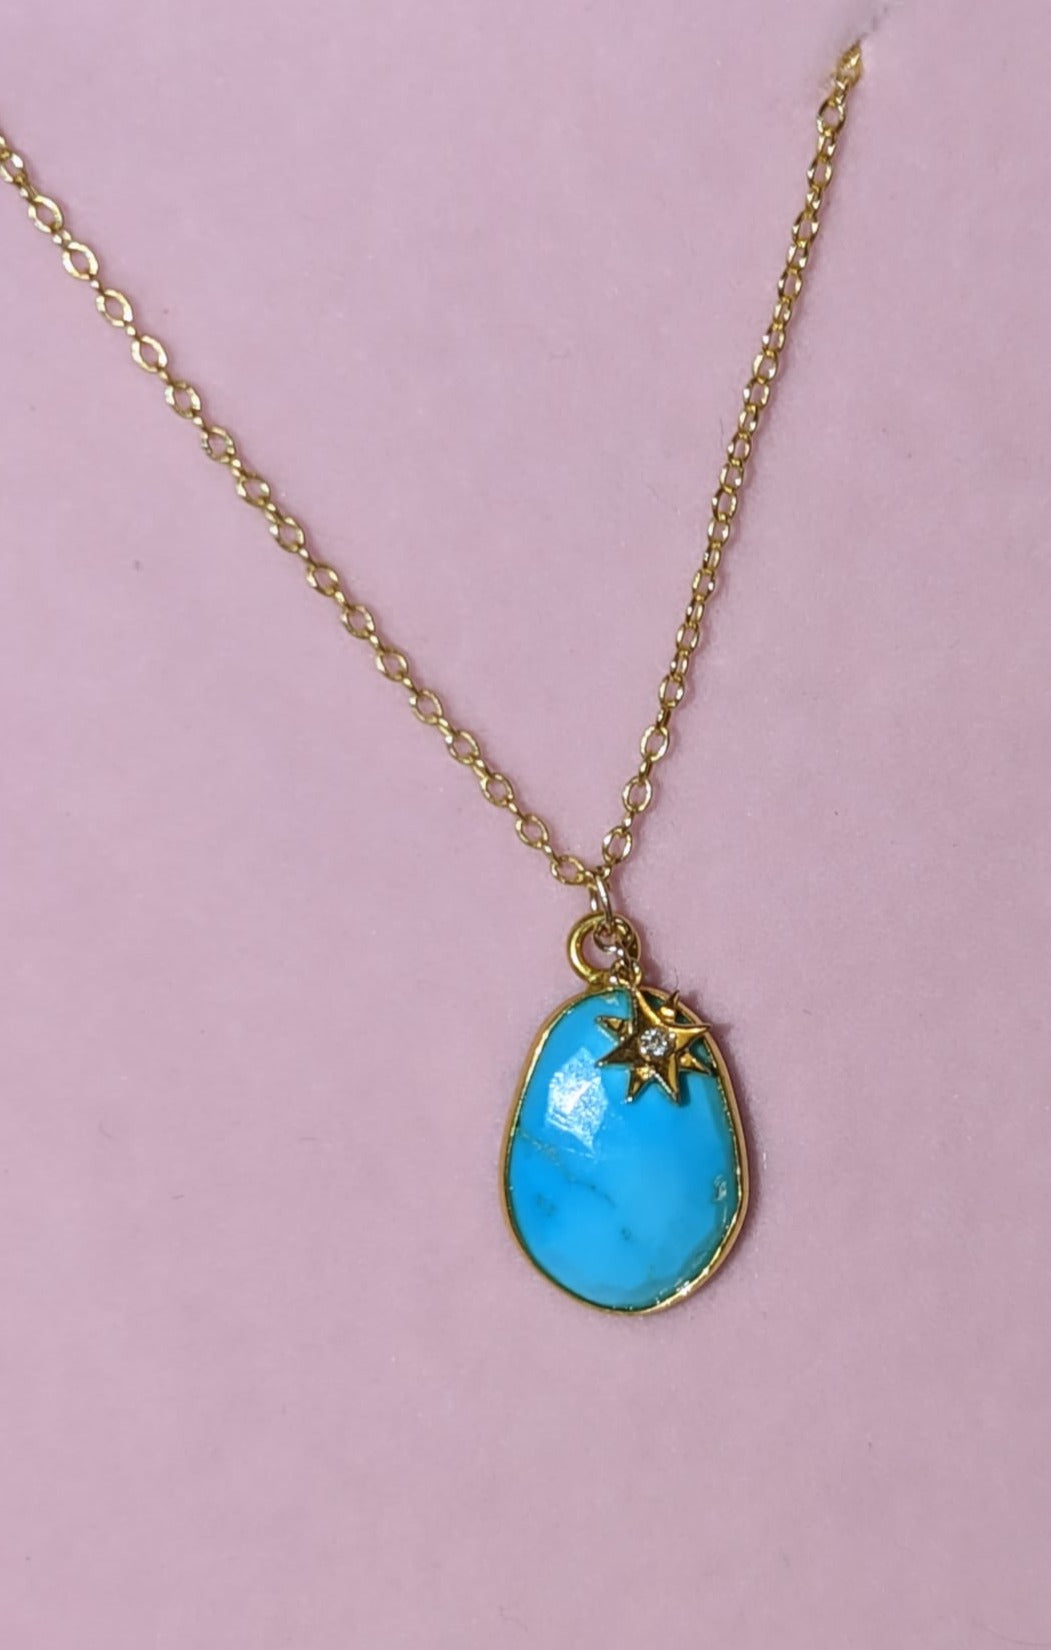 Wealth” Turquoise pendant, gold chain, luxury gift for women – Crystal  boutique